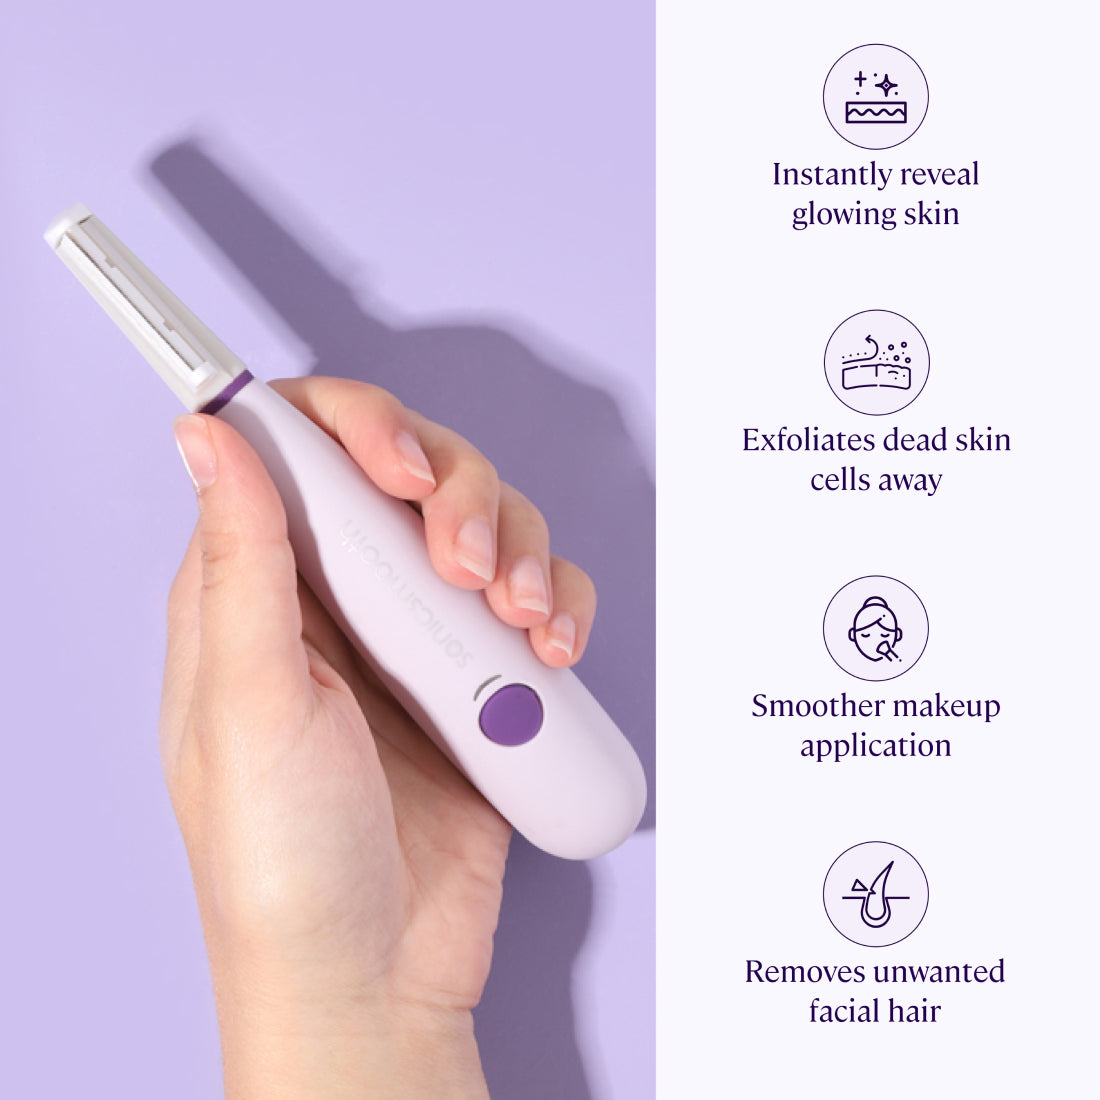 Pink Sonicsmooth Sonic Dermaplaning System